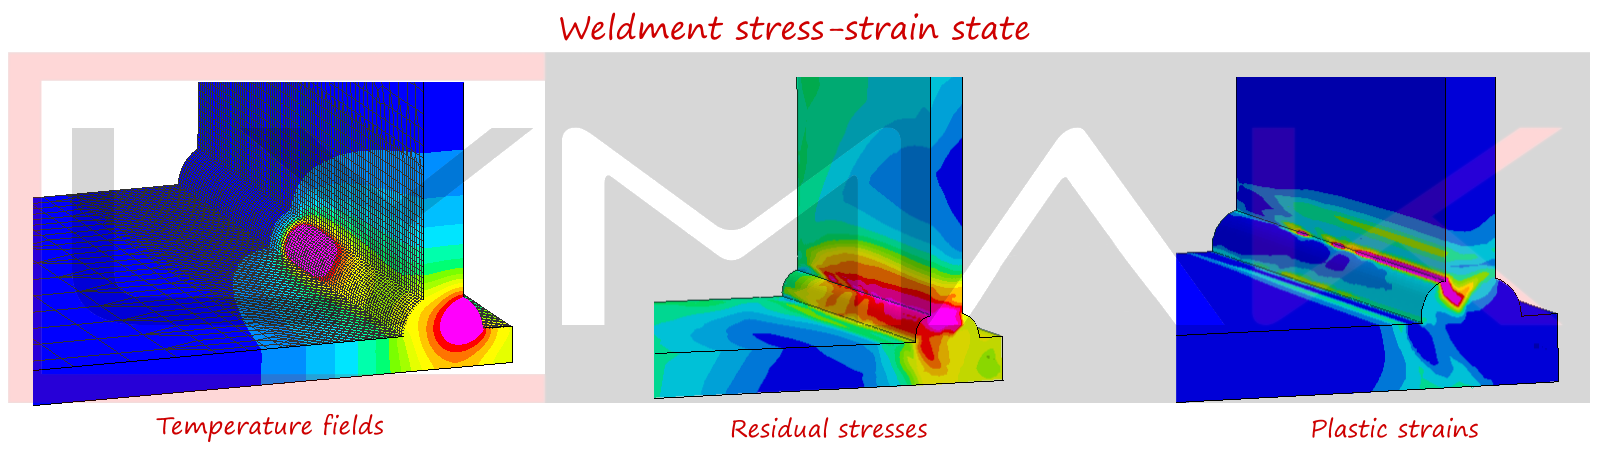 The post-weld state modelling